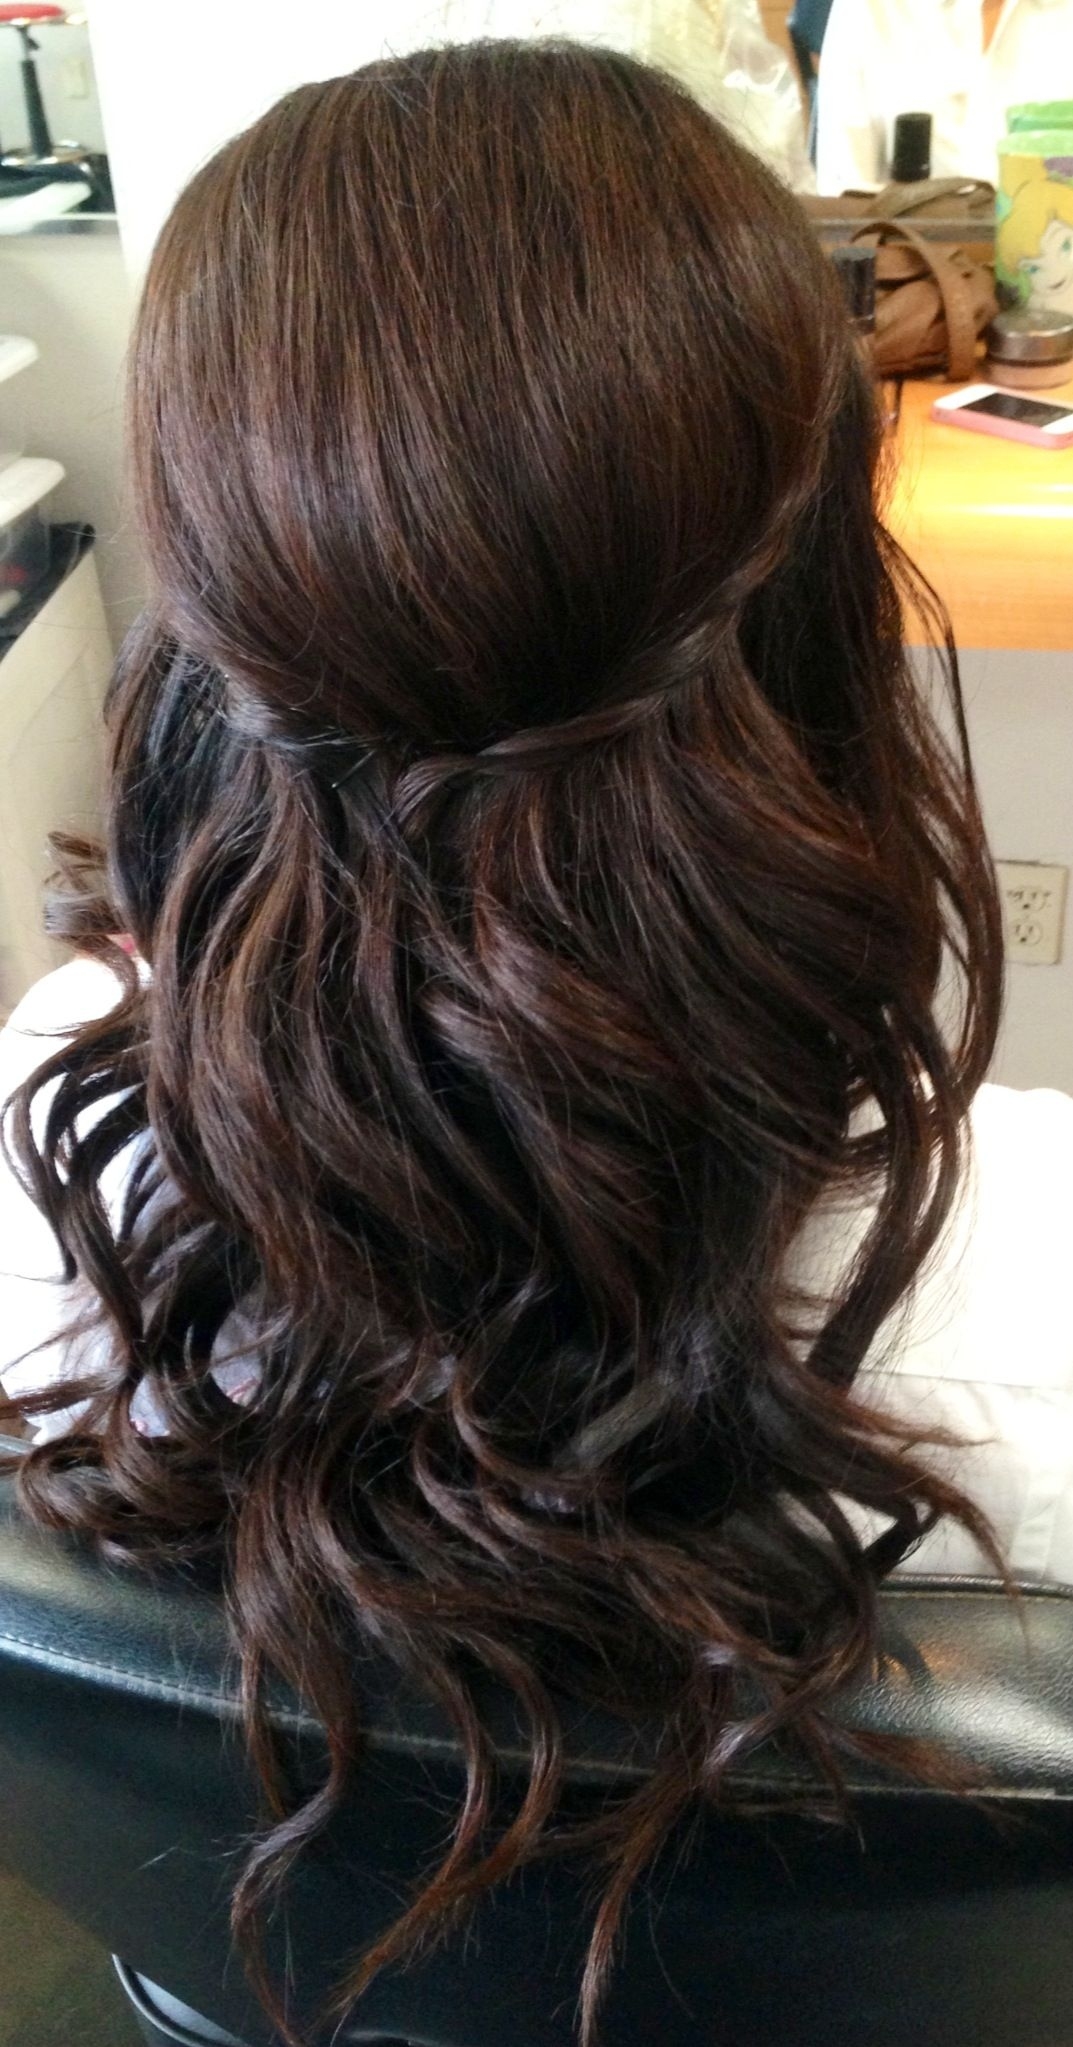 Wedding Updo, Wedding Hair, Bridal Hair, Curls, Half Up Half Down pertaining to The greatest Asian Half Up Hairstyles